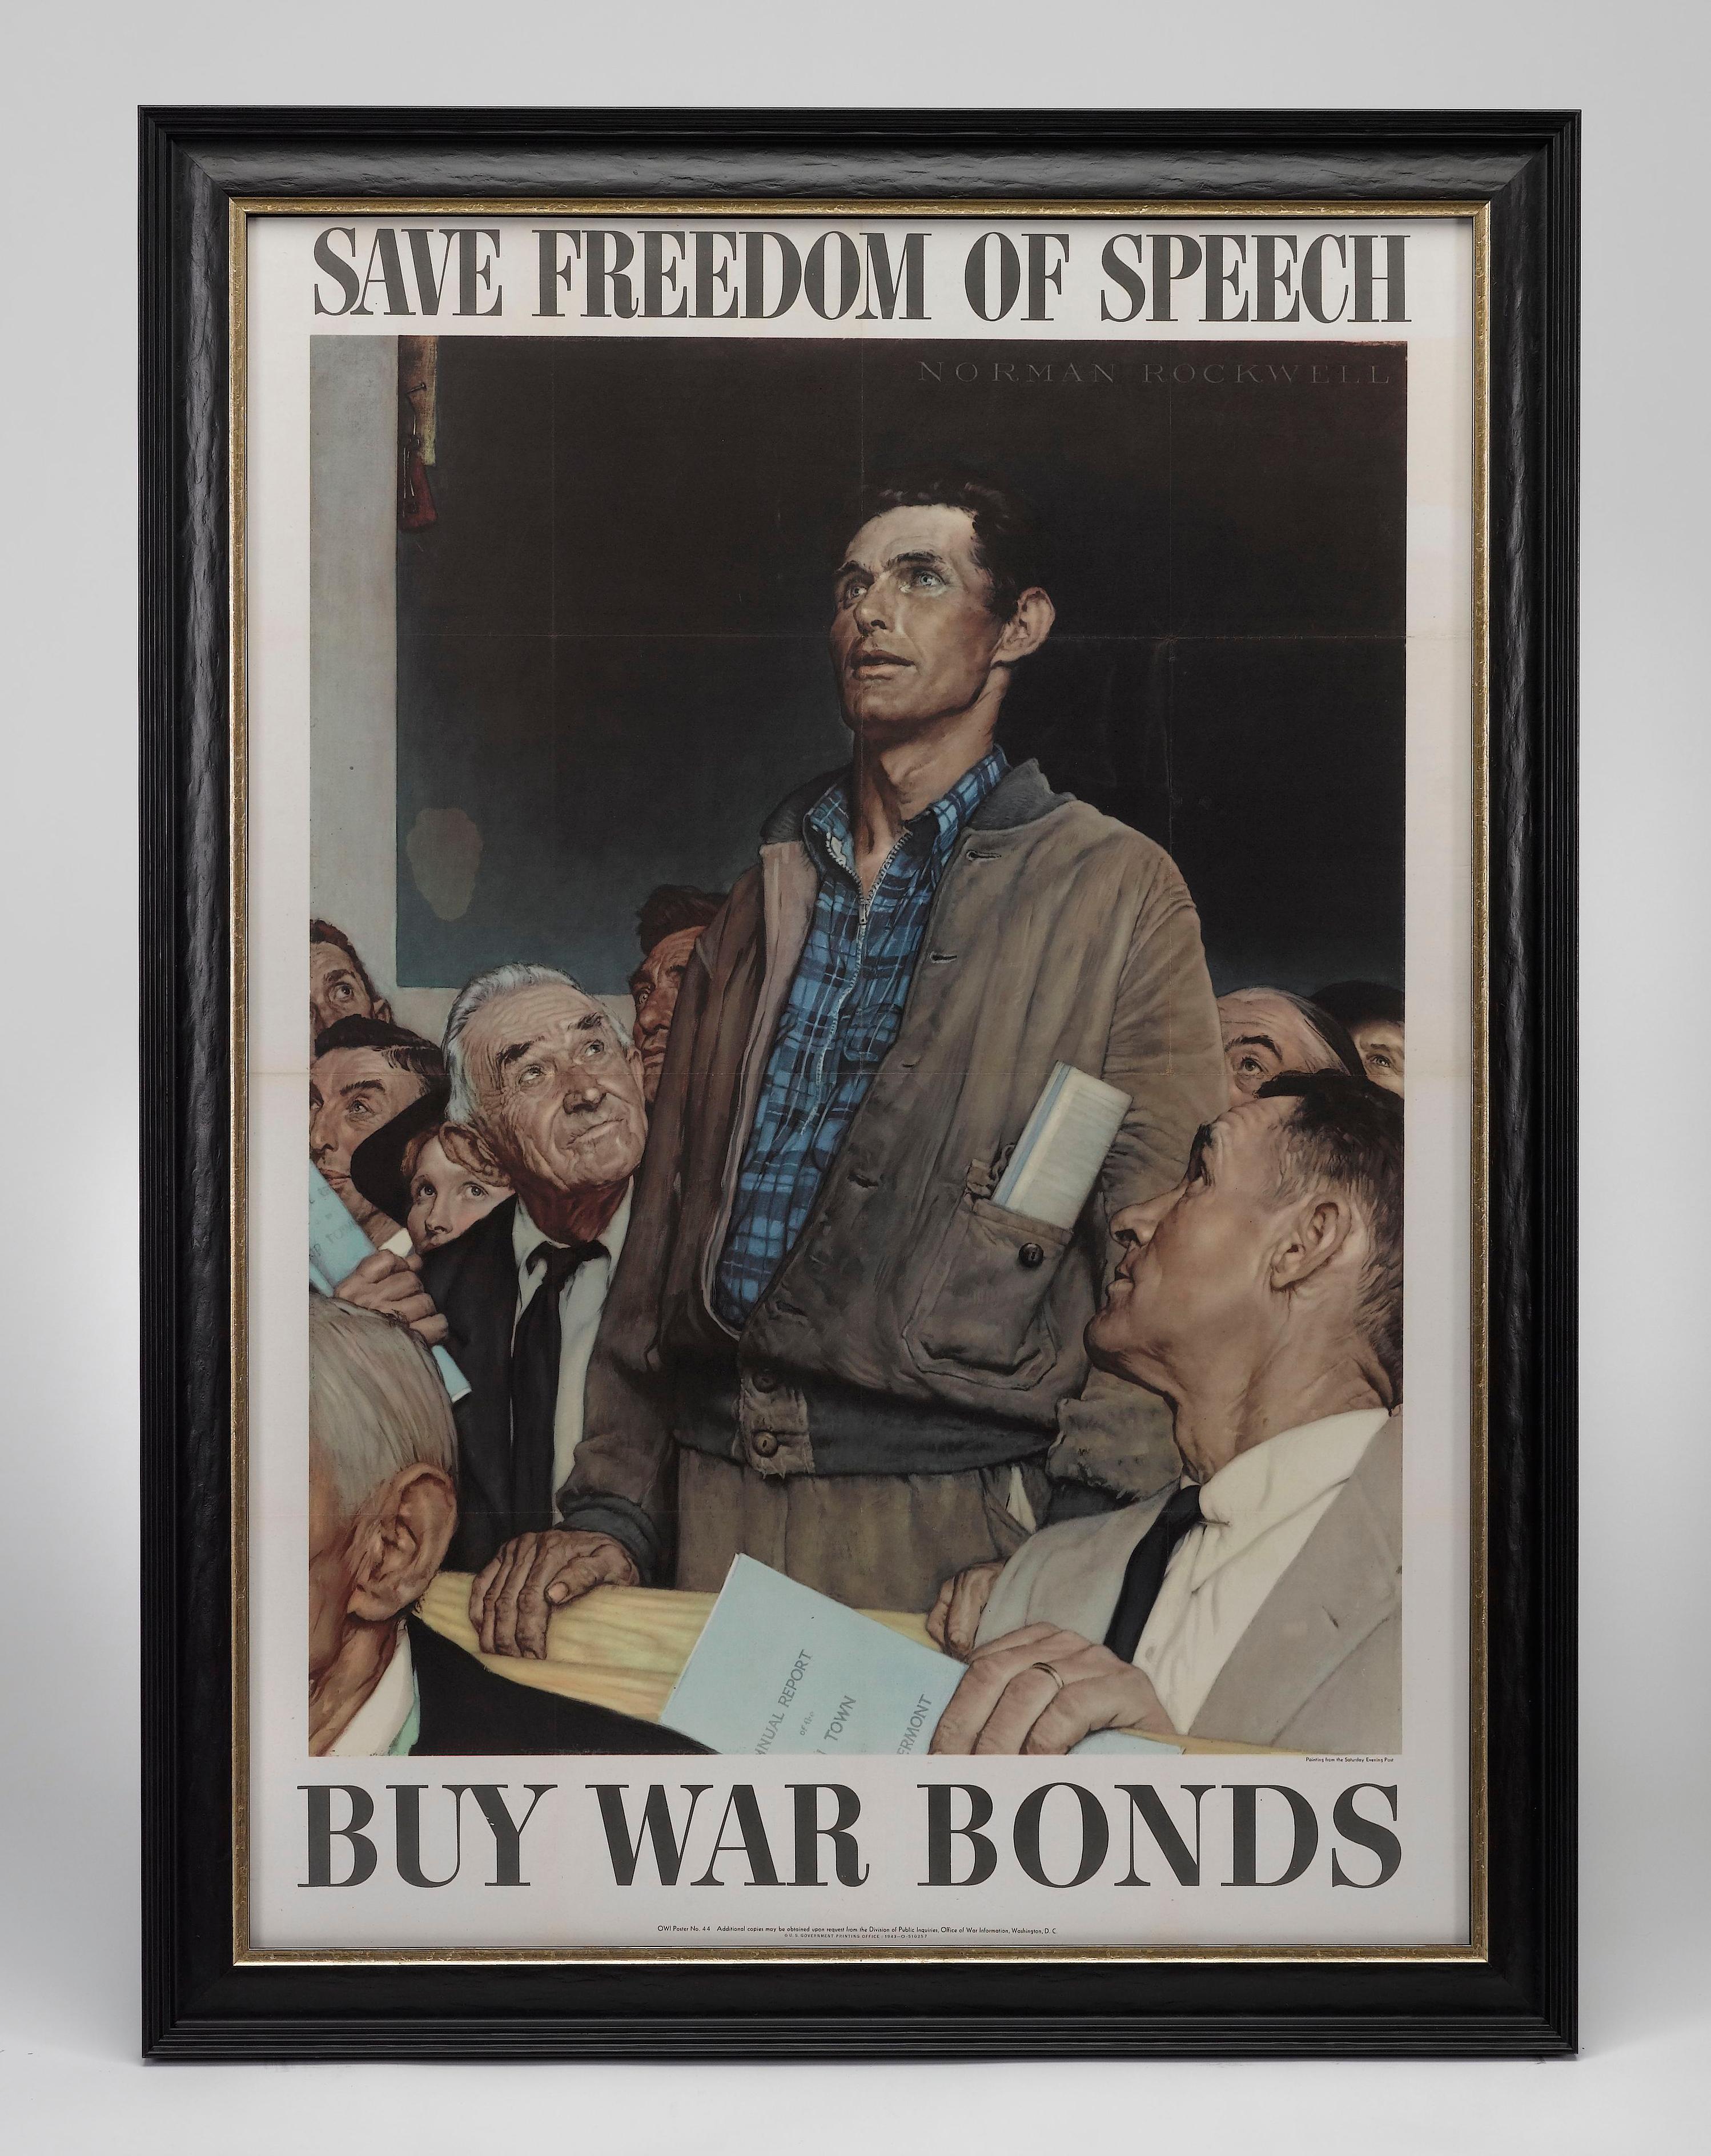 Each of these four War Bonds posters by Norman Rockwell is a visual representation of the closing remarks of President Roosevelt's 1941 State of the Union speech. Delivered to Congress on January 6, 1941, Roosevelt painted his vision for a post-war